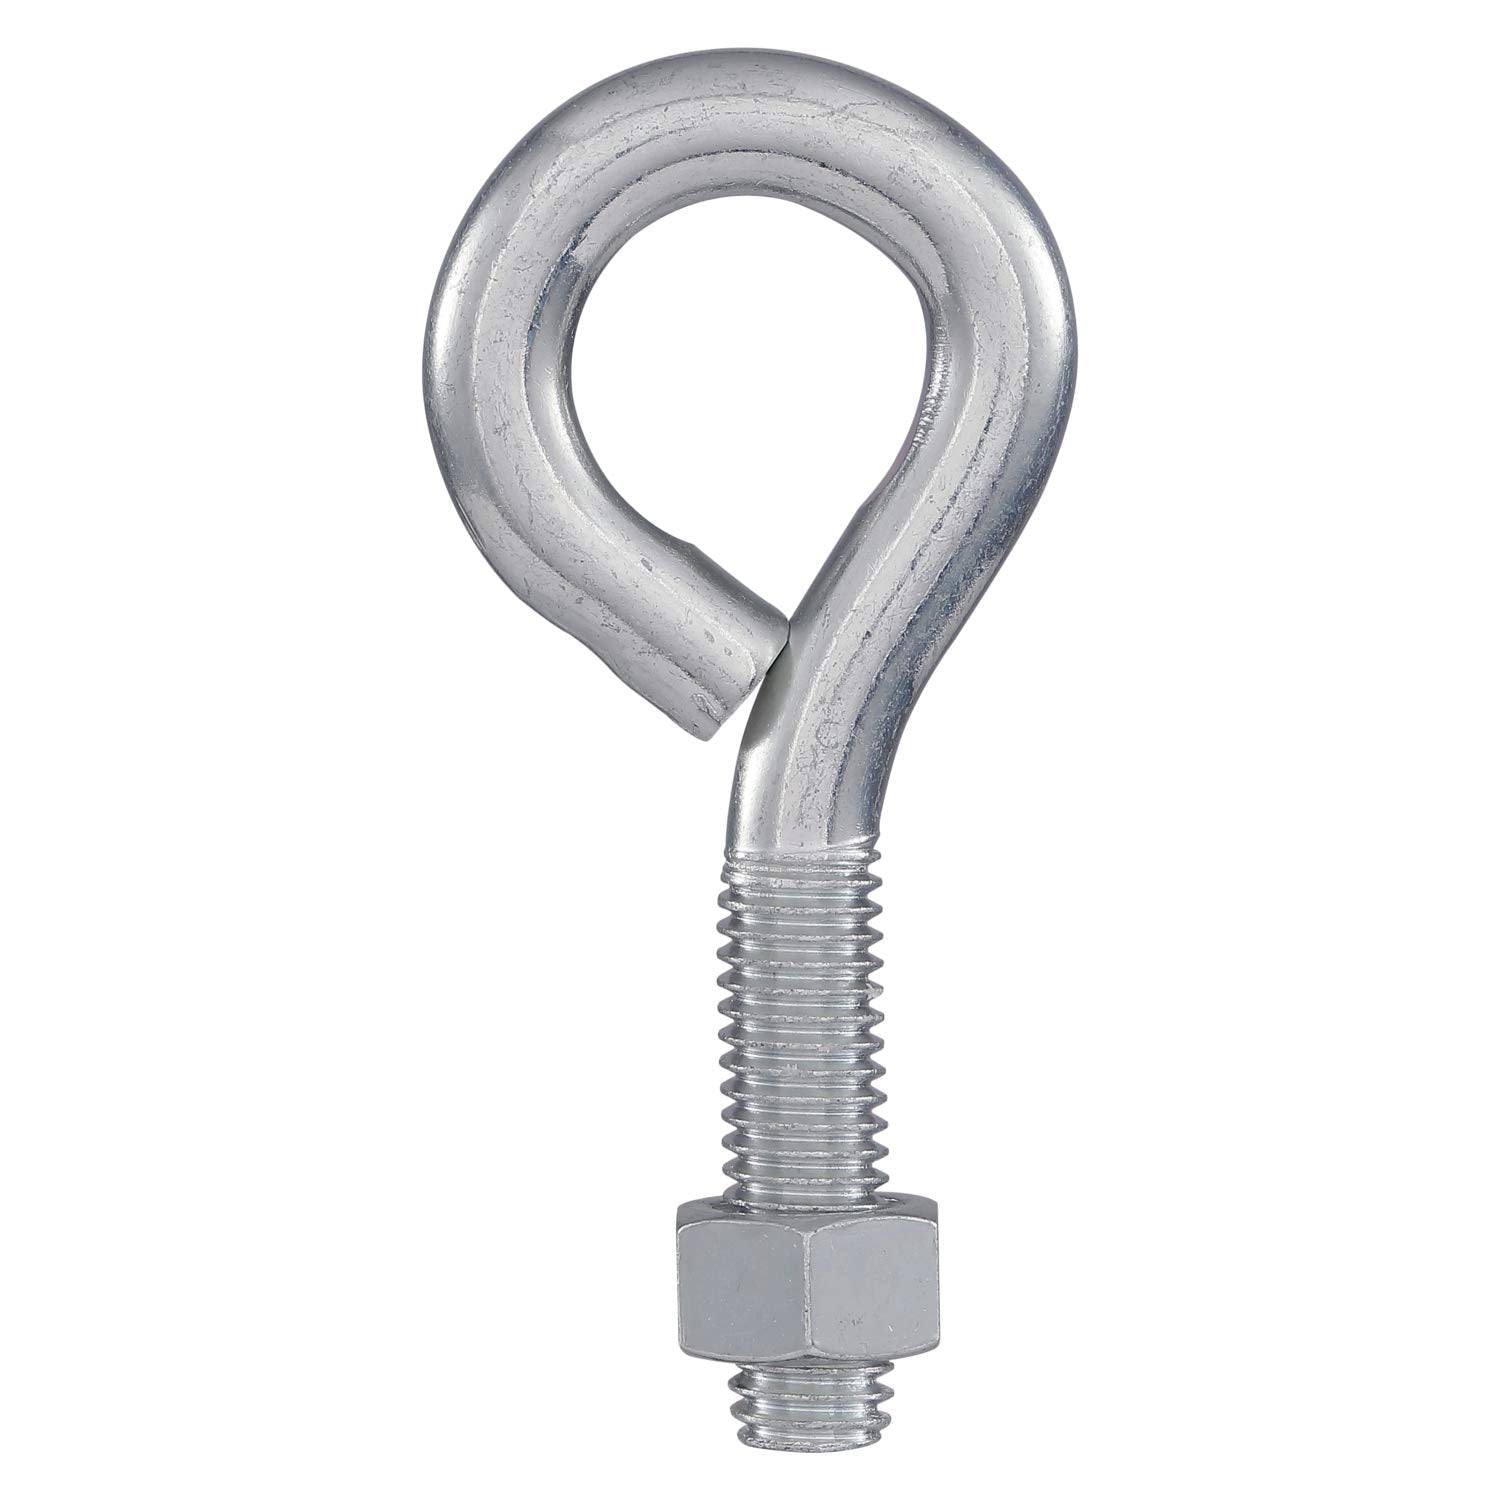 National Hardware Zinc Plated Eye Bolt - with Hex Nut, 1/2" x 4"